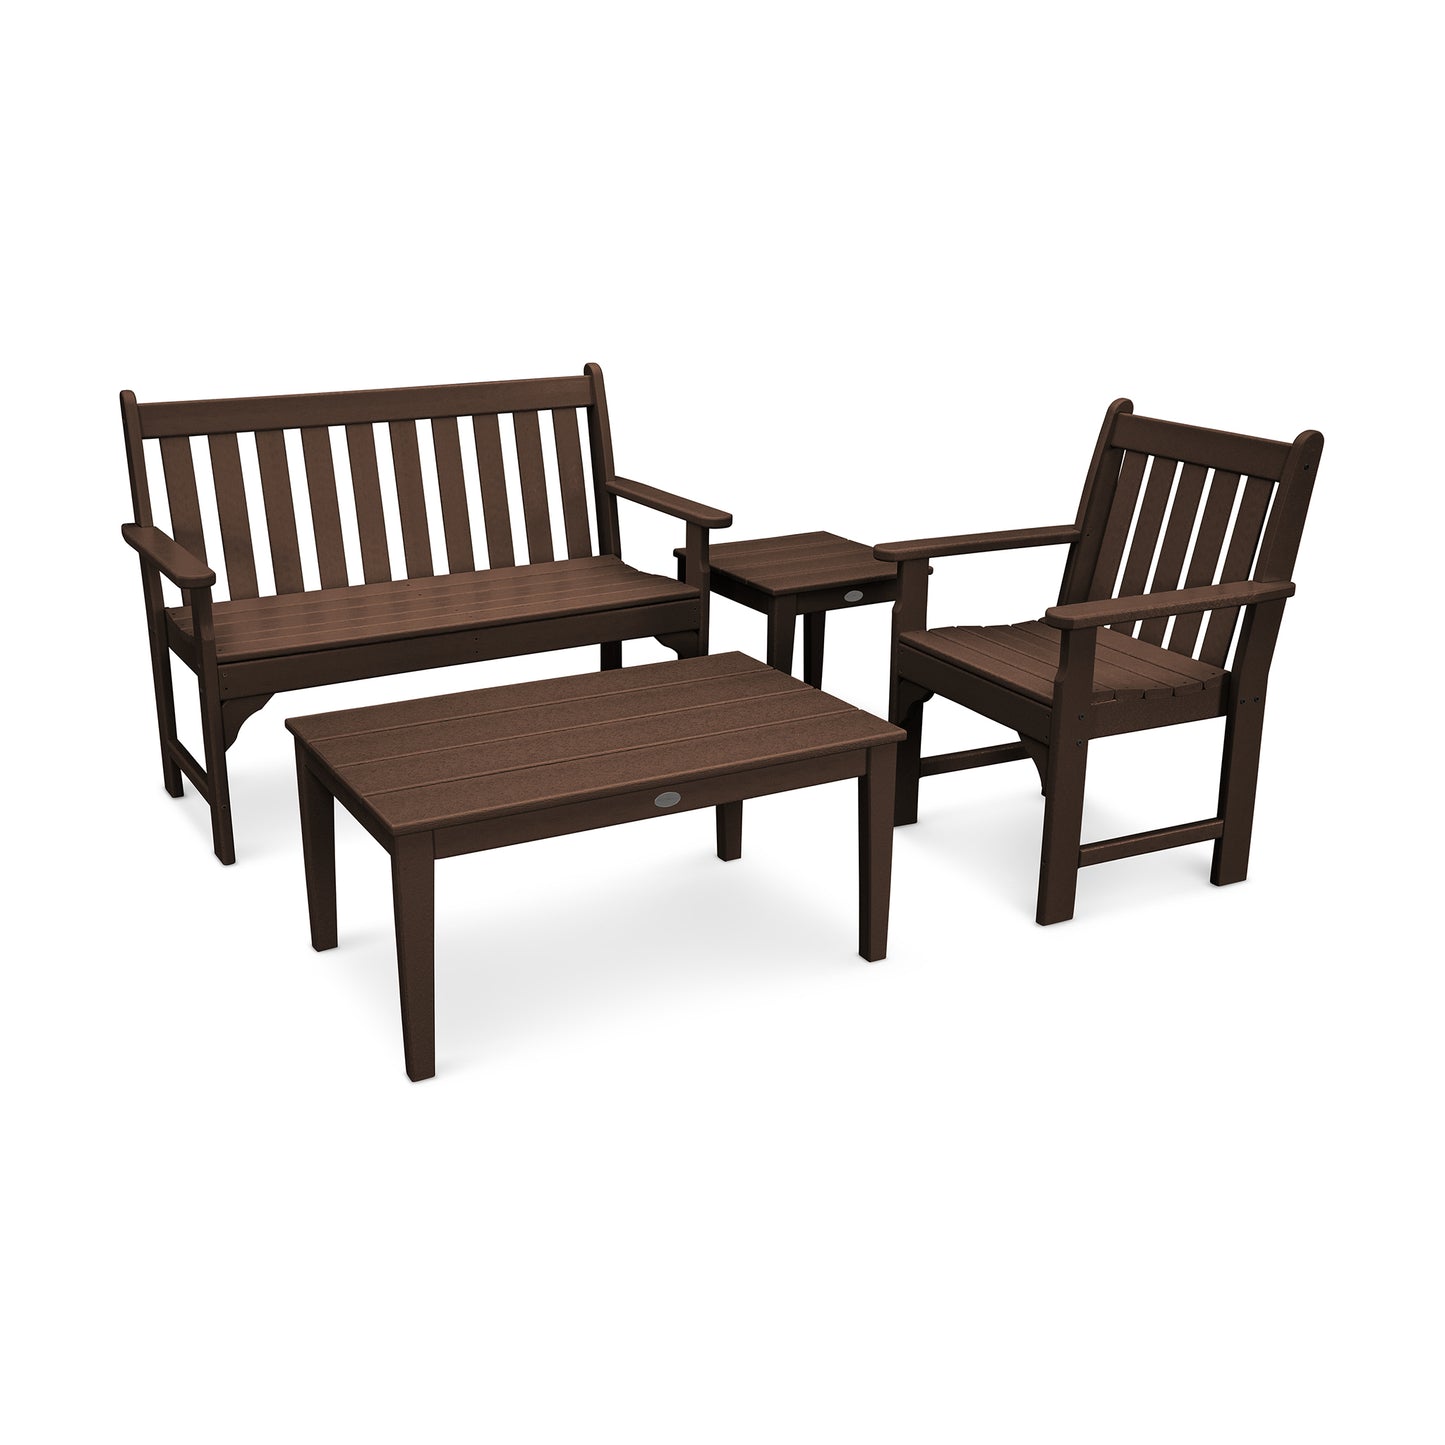 Outdoor seating set consisting of a bench, a chair, and a rectangular coffee table, all crafted in dark brown POLYWOOD Vineyard lumber with a slatted design, isolated on a white background.